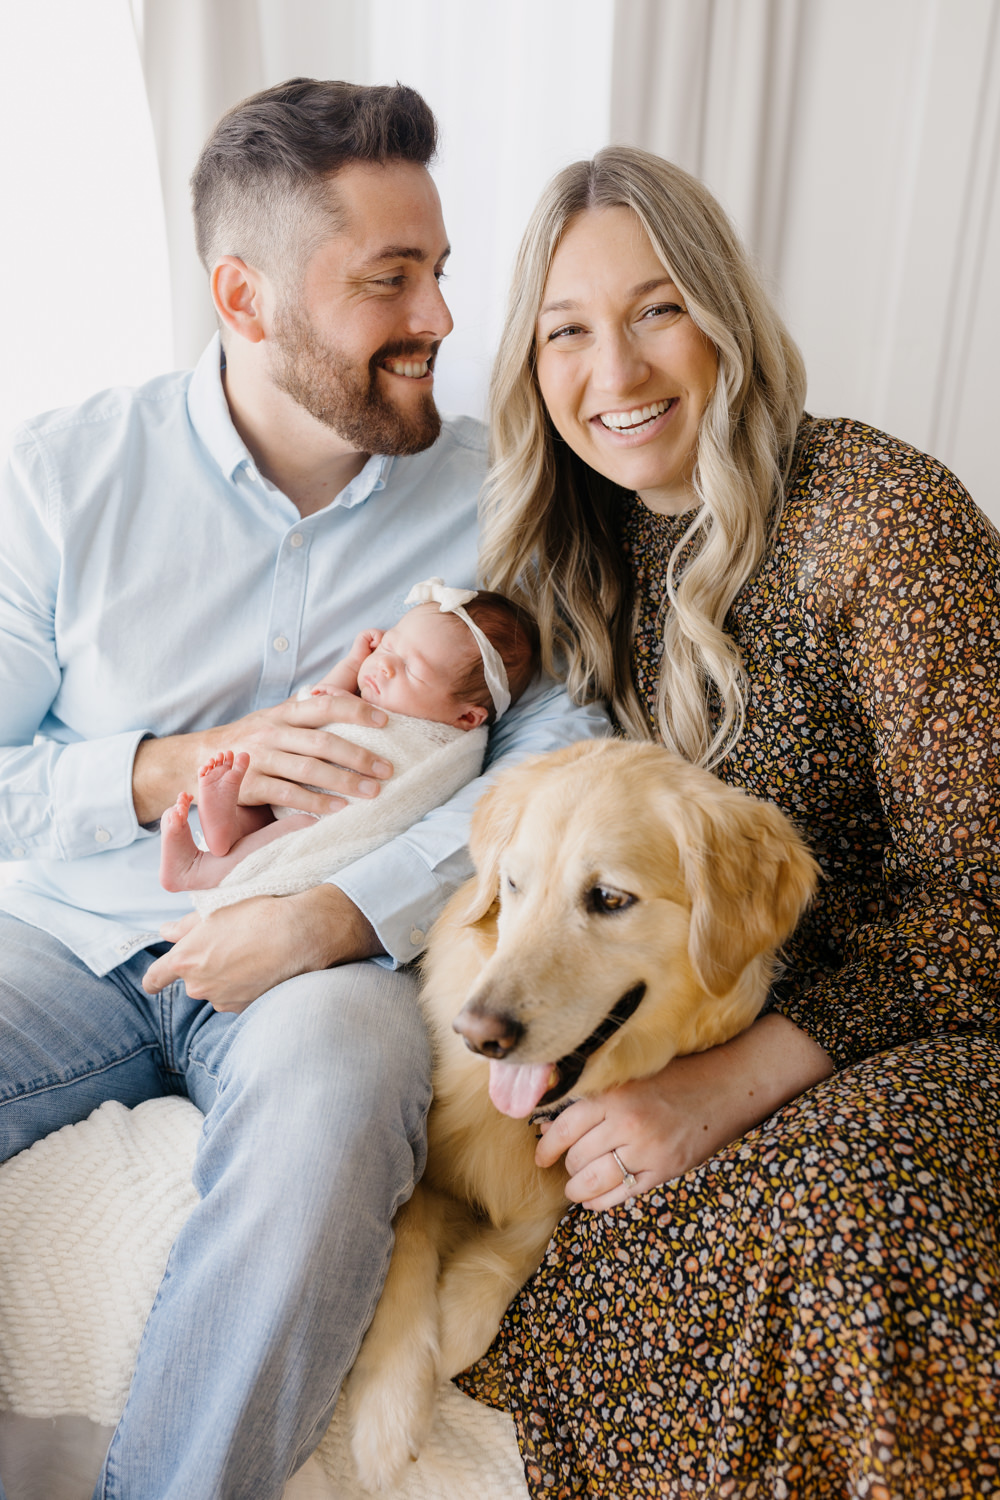 A photo from a newborn session with golden retriever including A smiling man and woman holding their newborn daughter, they are sitting on a white bed with their golden retriever between them at tayler Enerle's newborn photographer studio in Los Osos, the man is looking at his wife adoringly. 